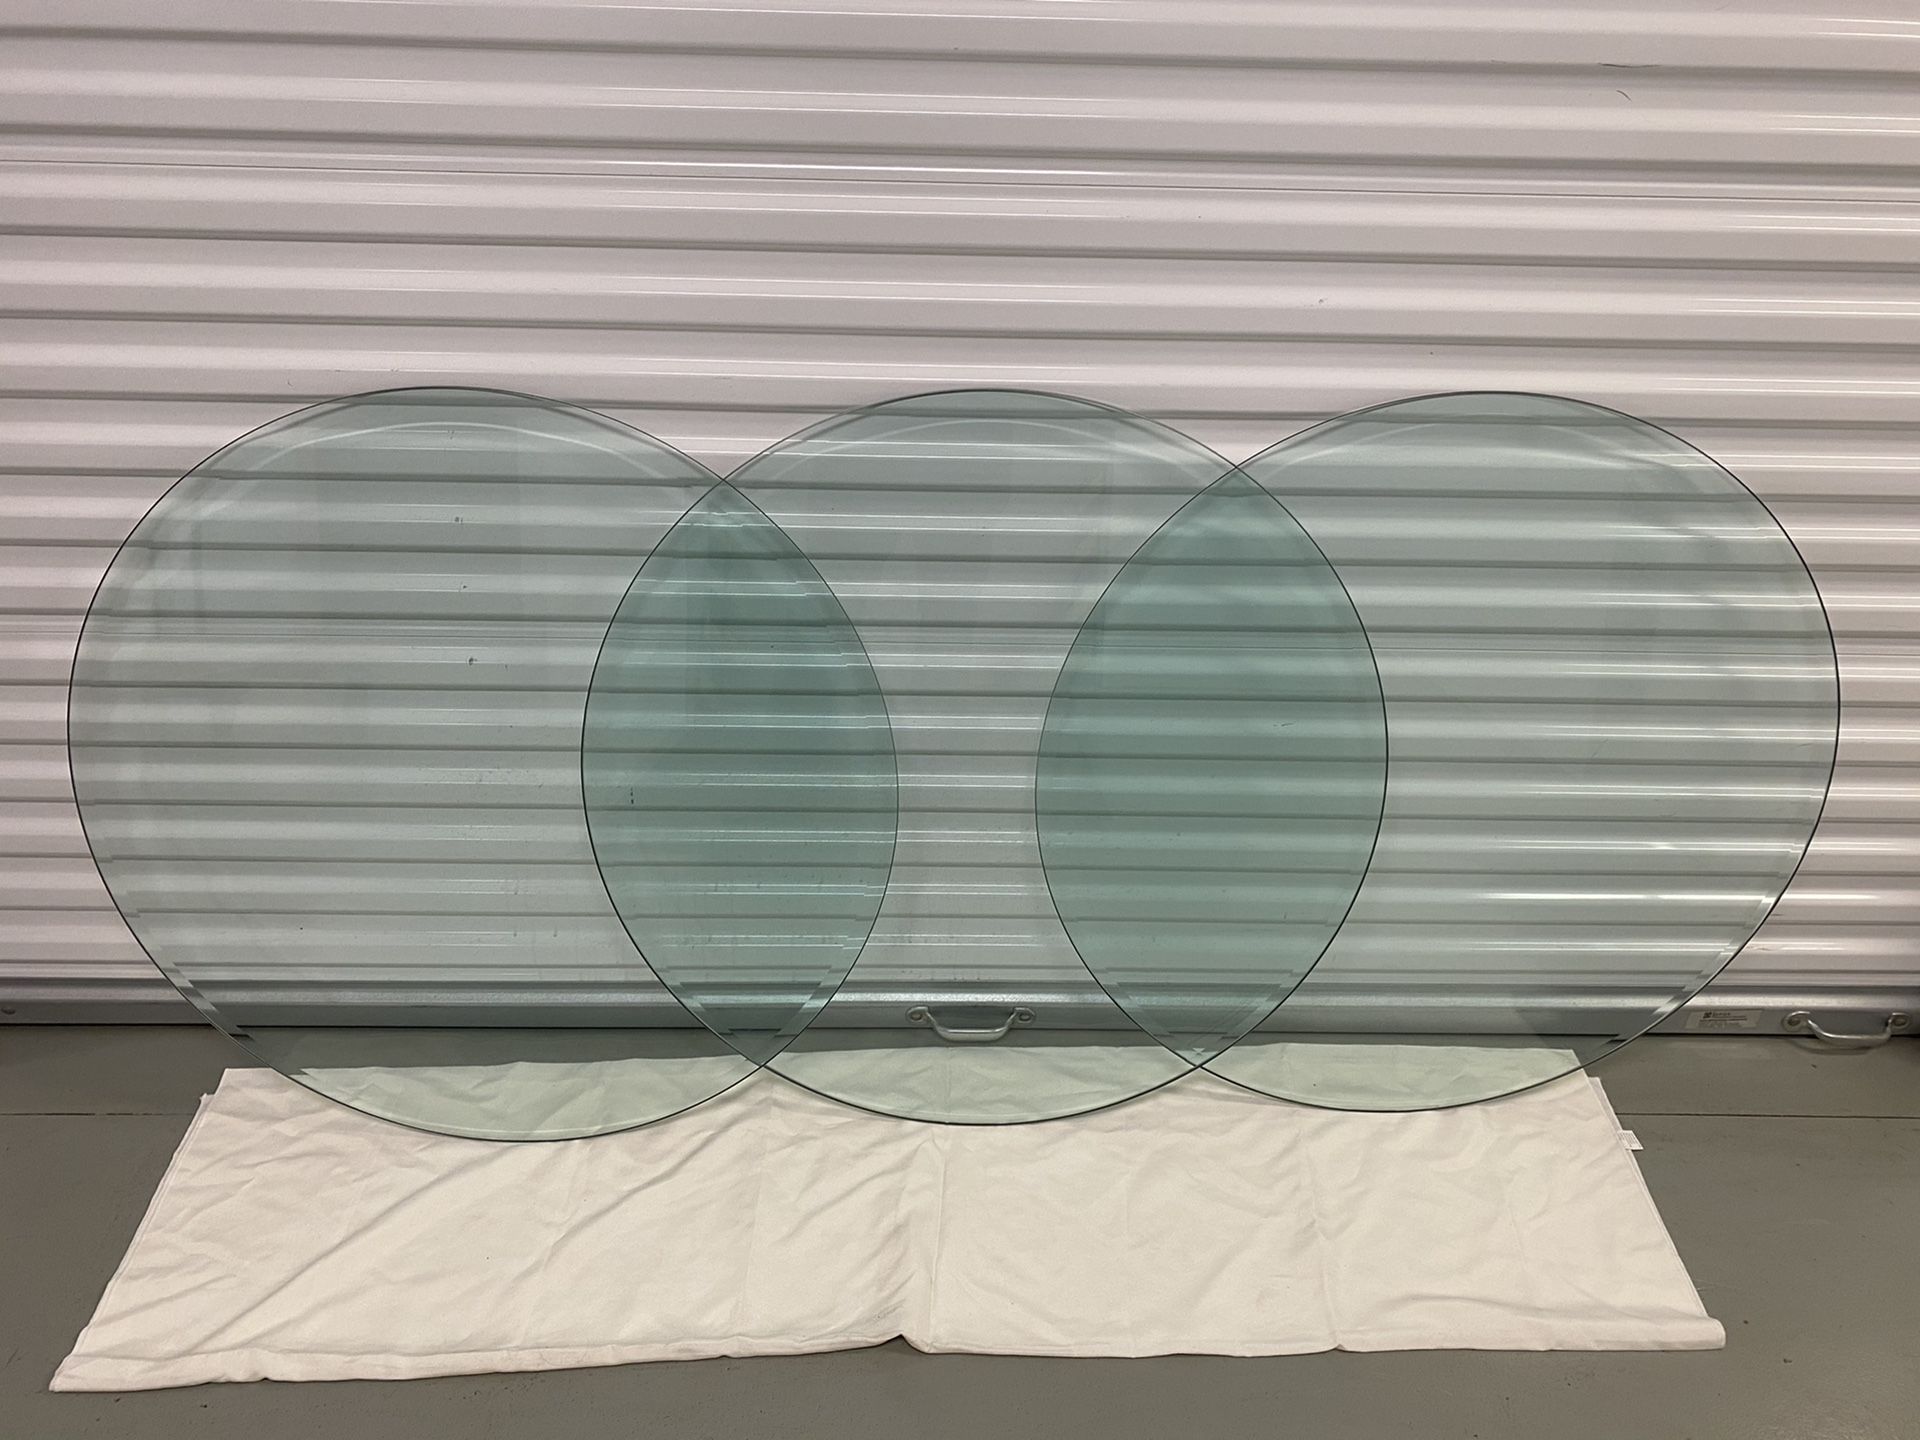 Set of 3 Pieces of Circular 3/8” Beveled Glass - Tempered